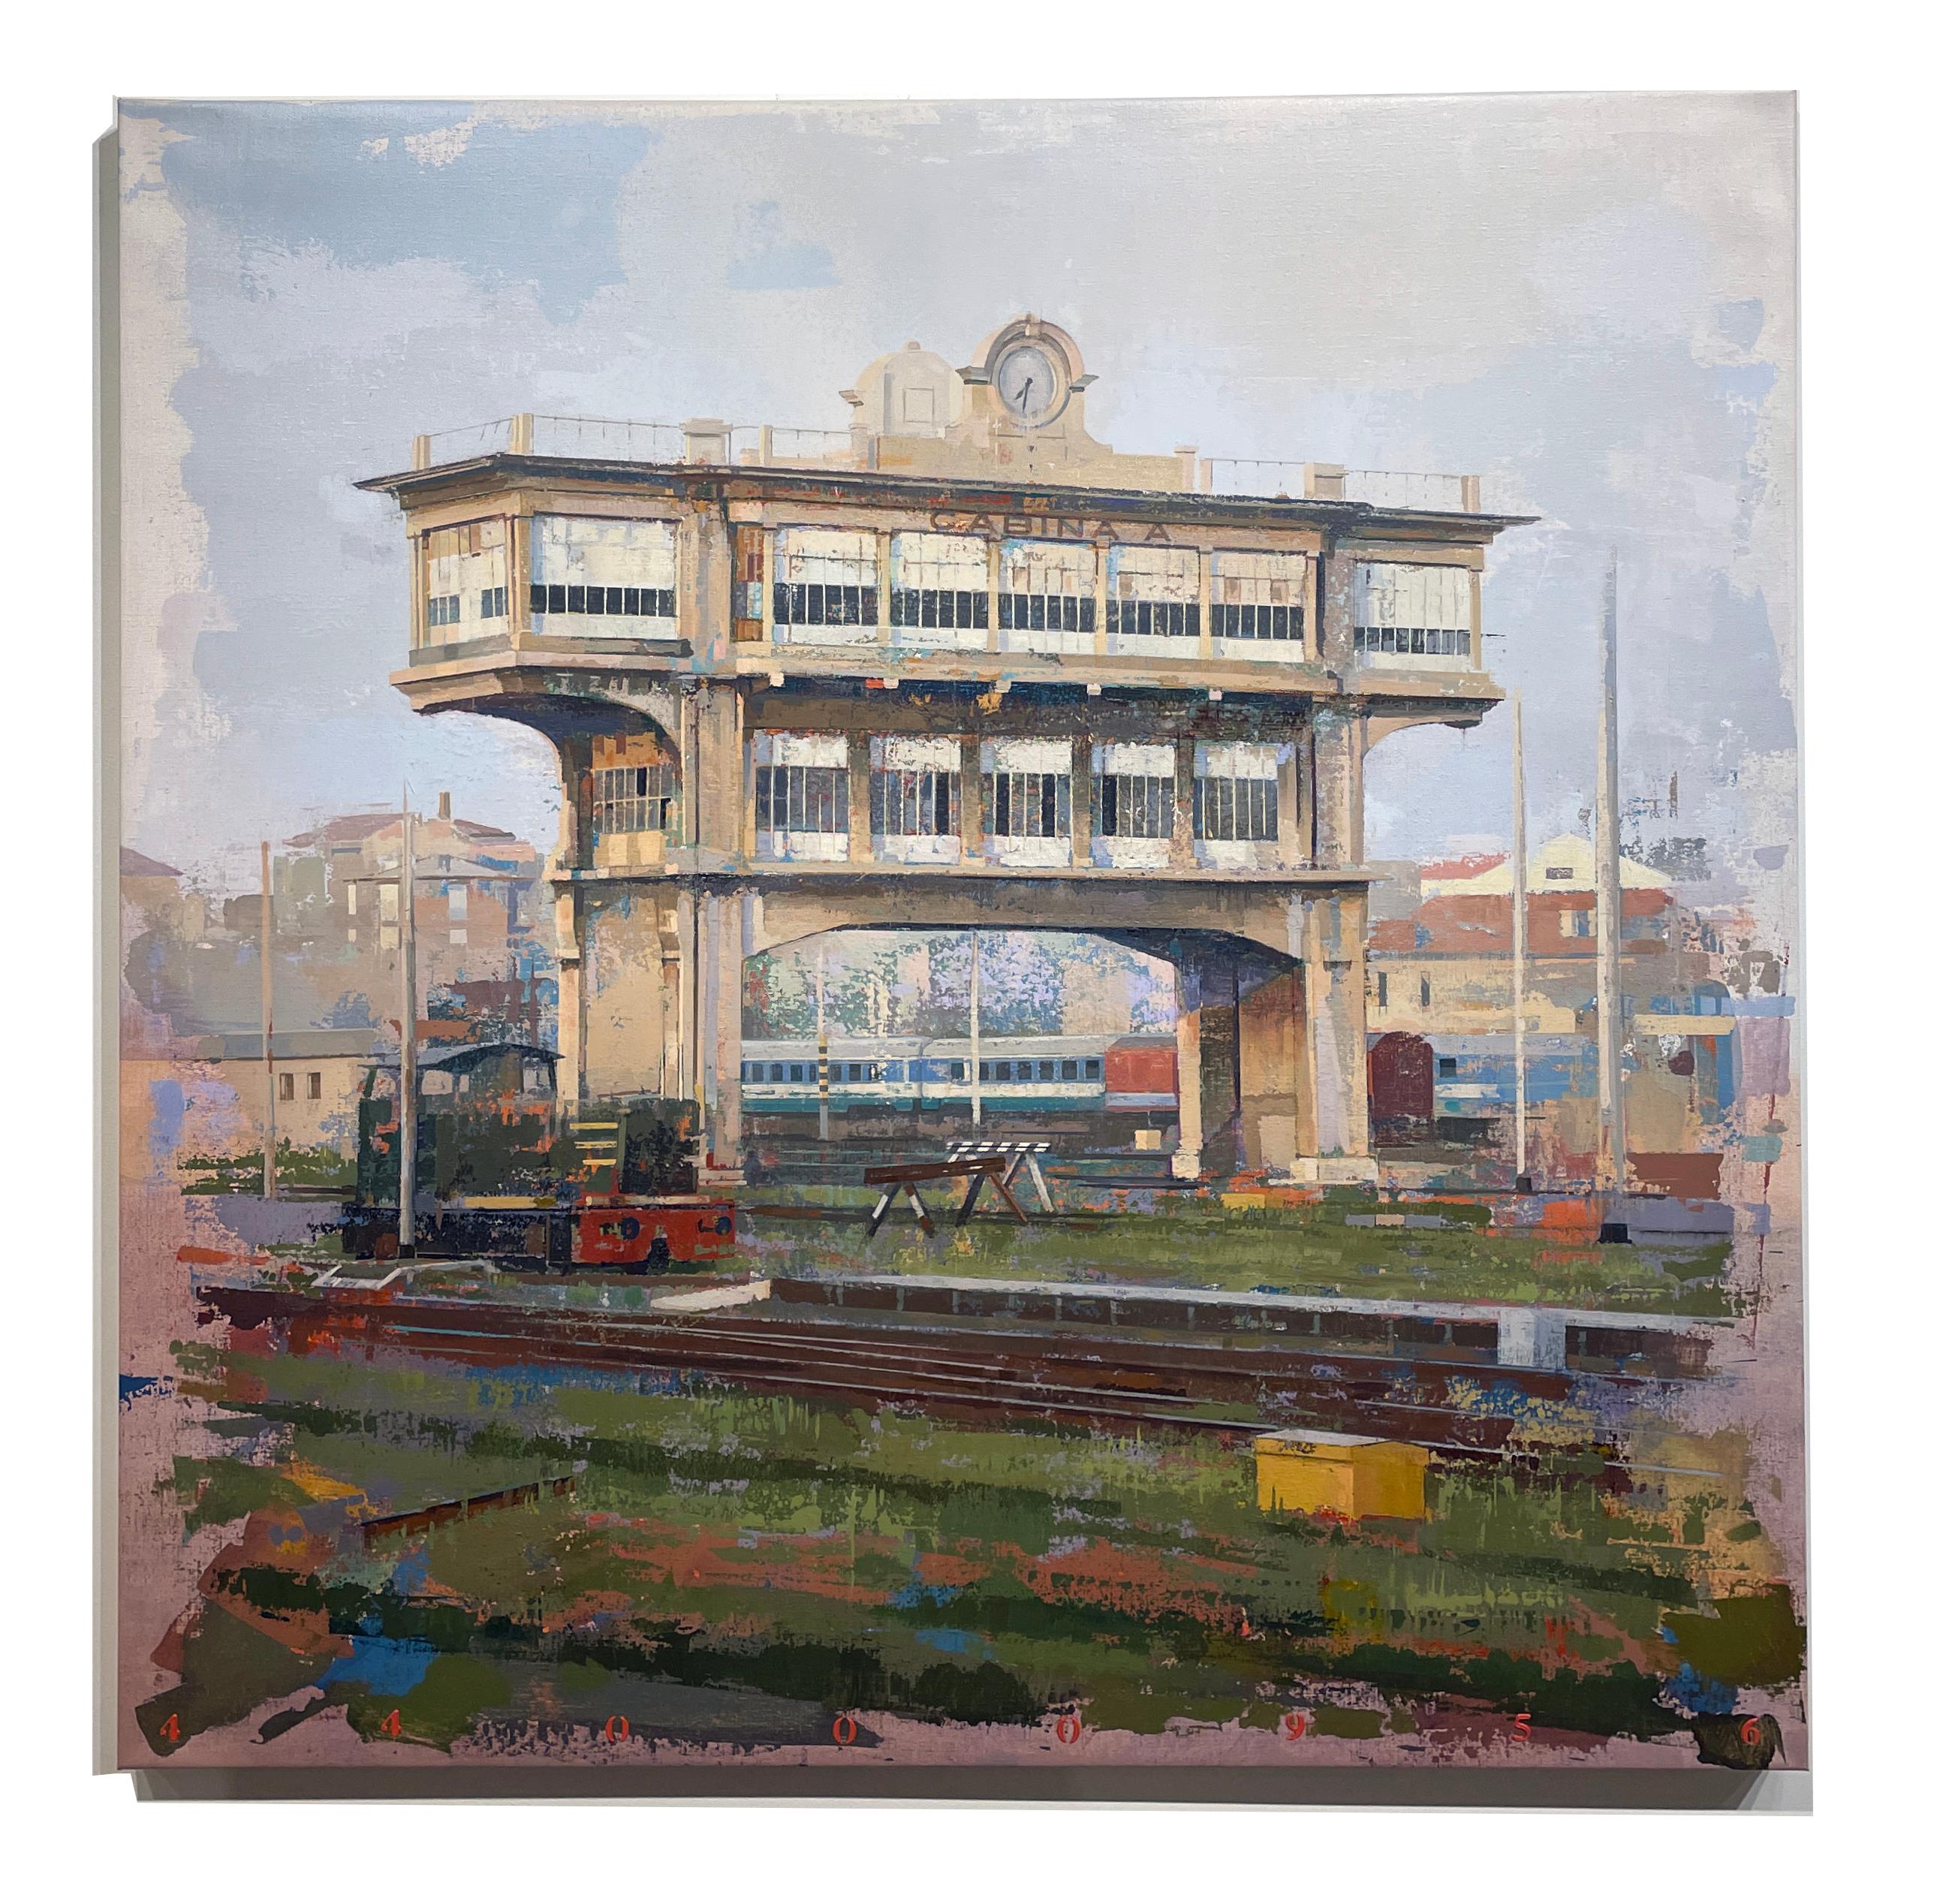 Cabana A - Abstracted Urban Landscape of Tower at Milano Centrale Train Station - Painting by Albert Vidal Moreno